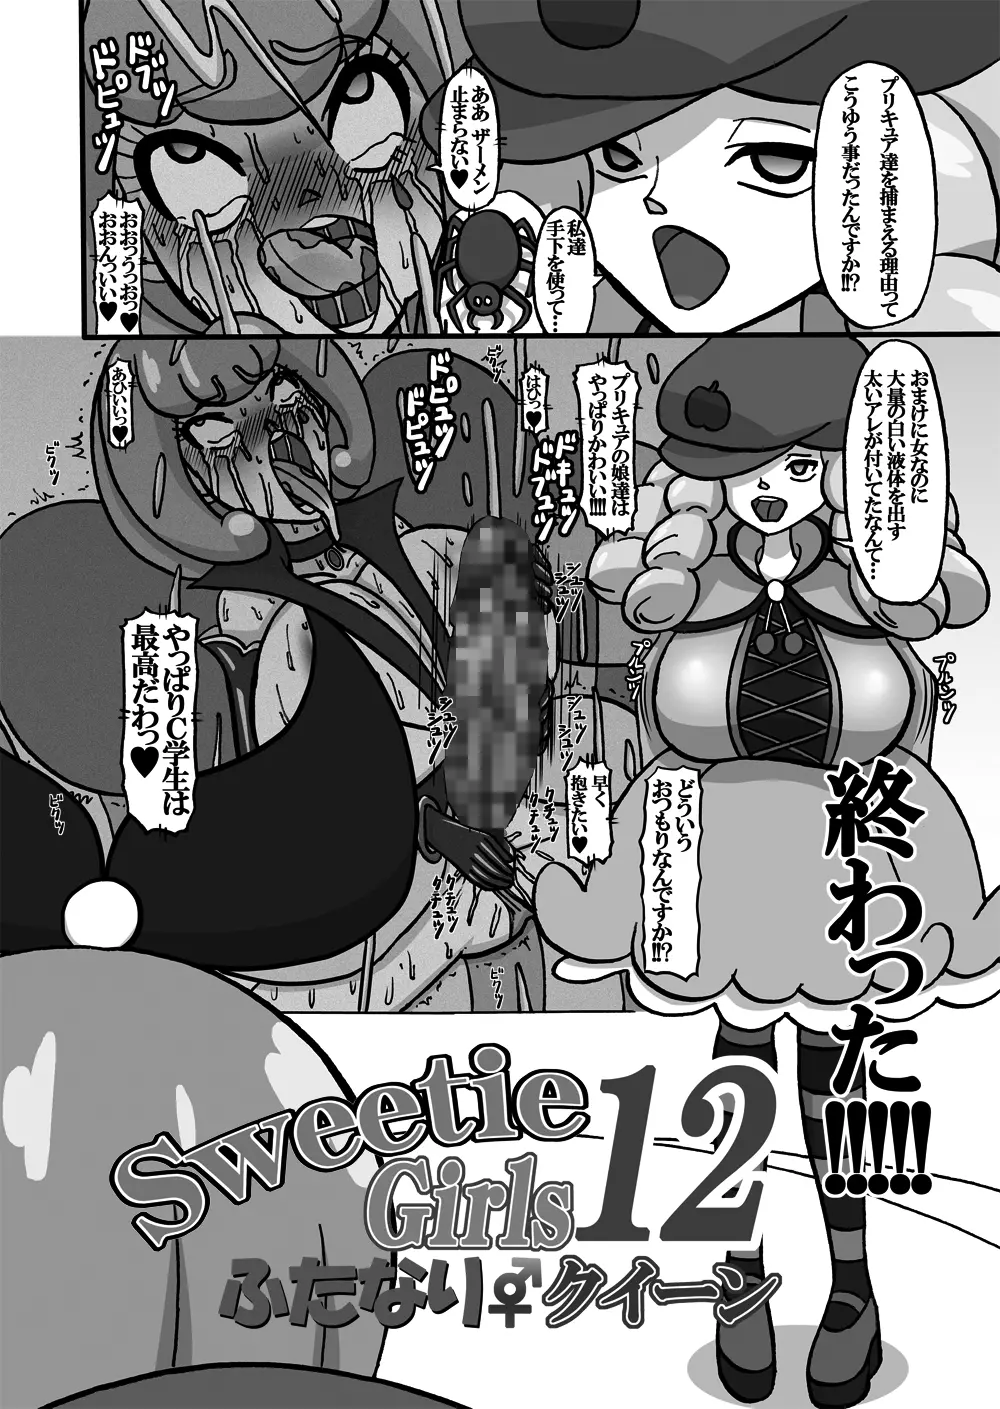 Sweetie Girls 12 ～ふたなりクイーン～ - page4